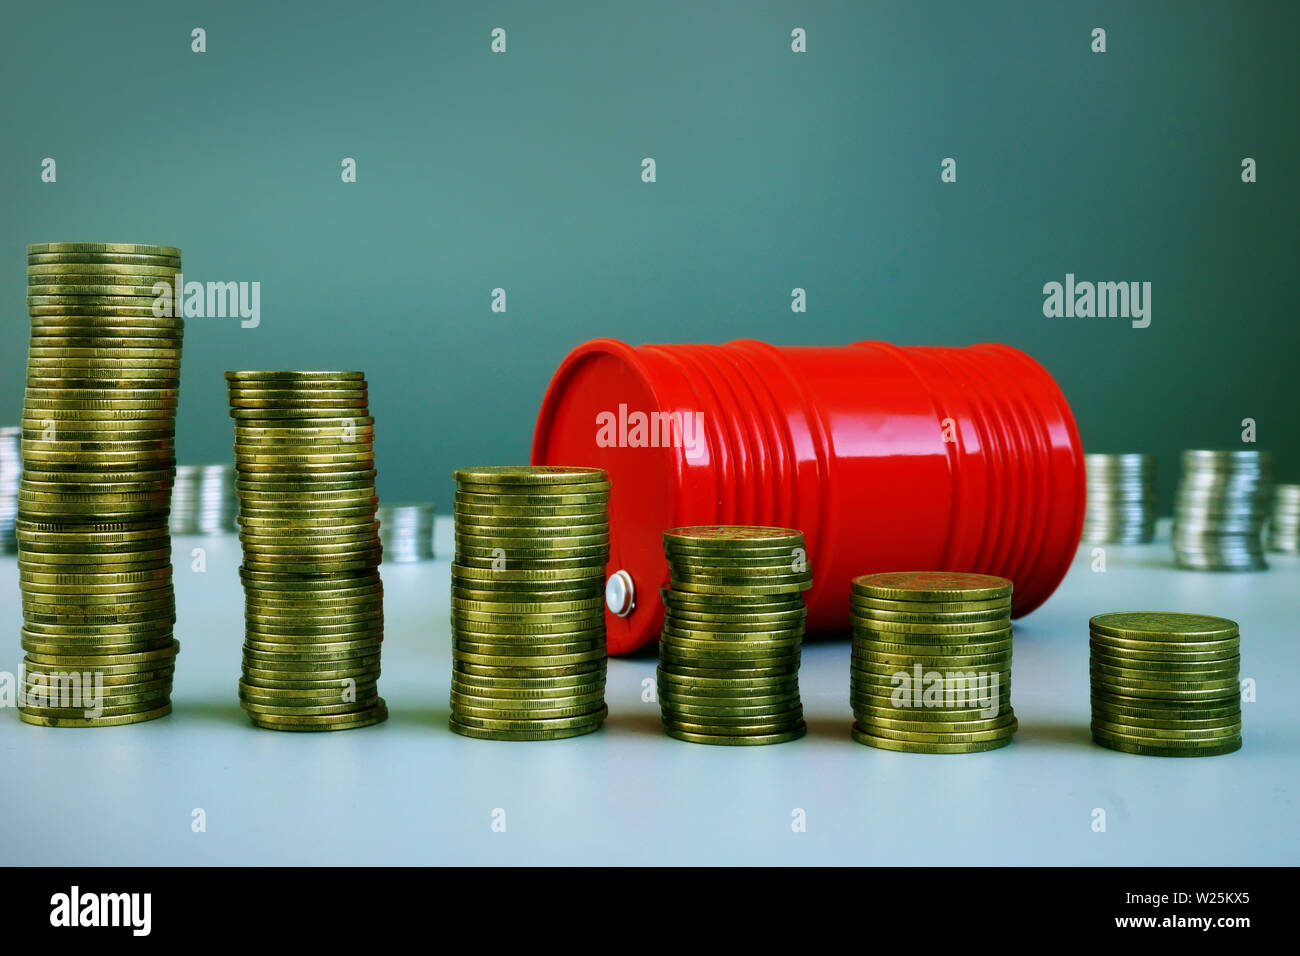 Oil price drop. Red barrel and money. Stock Photo